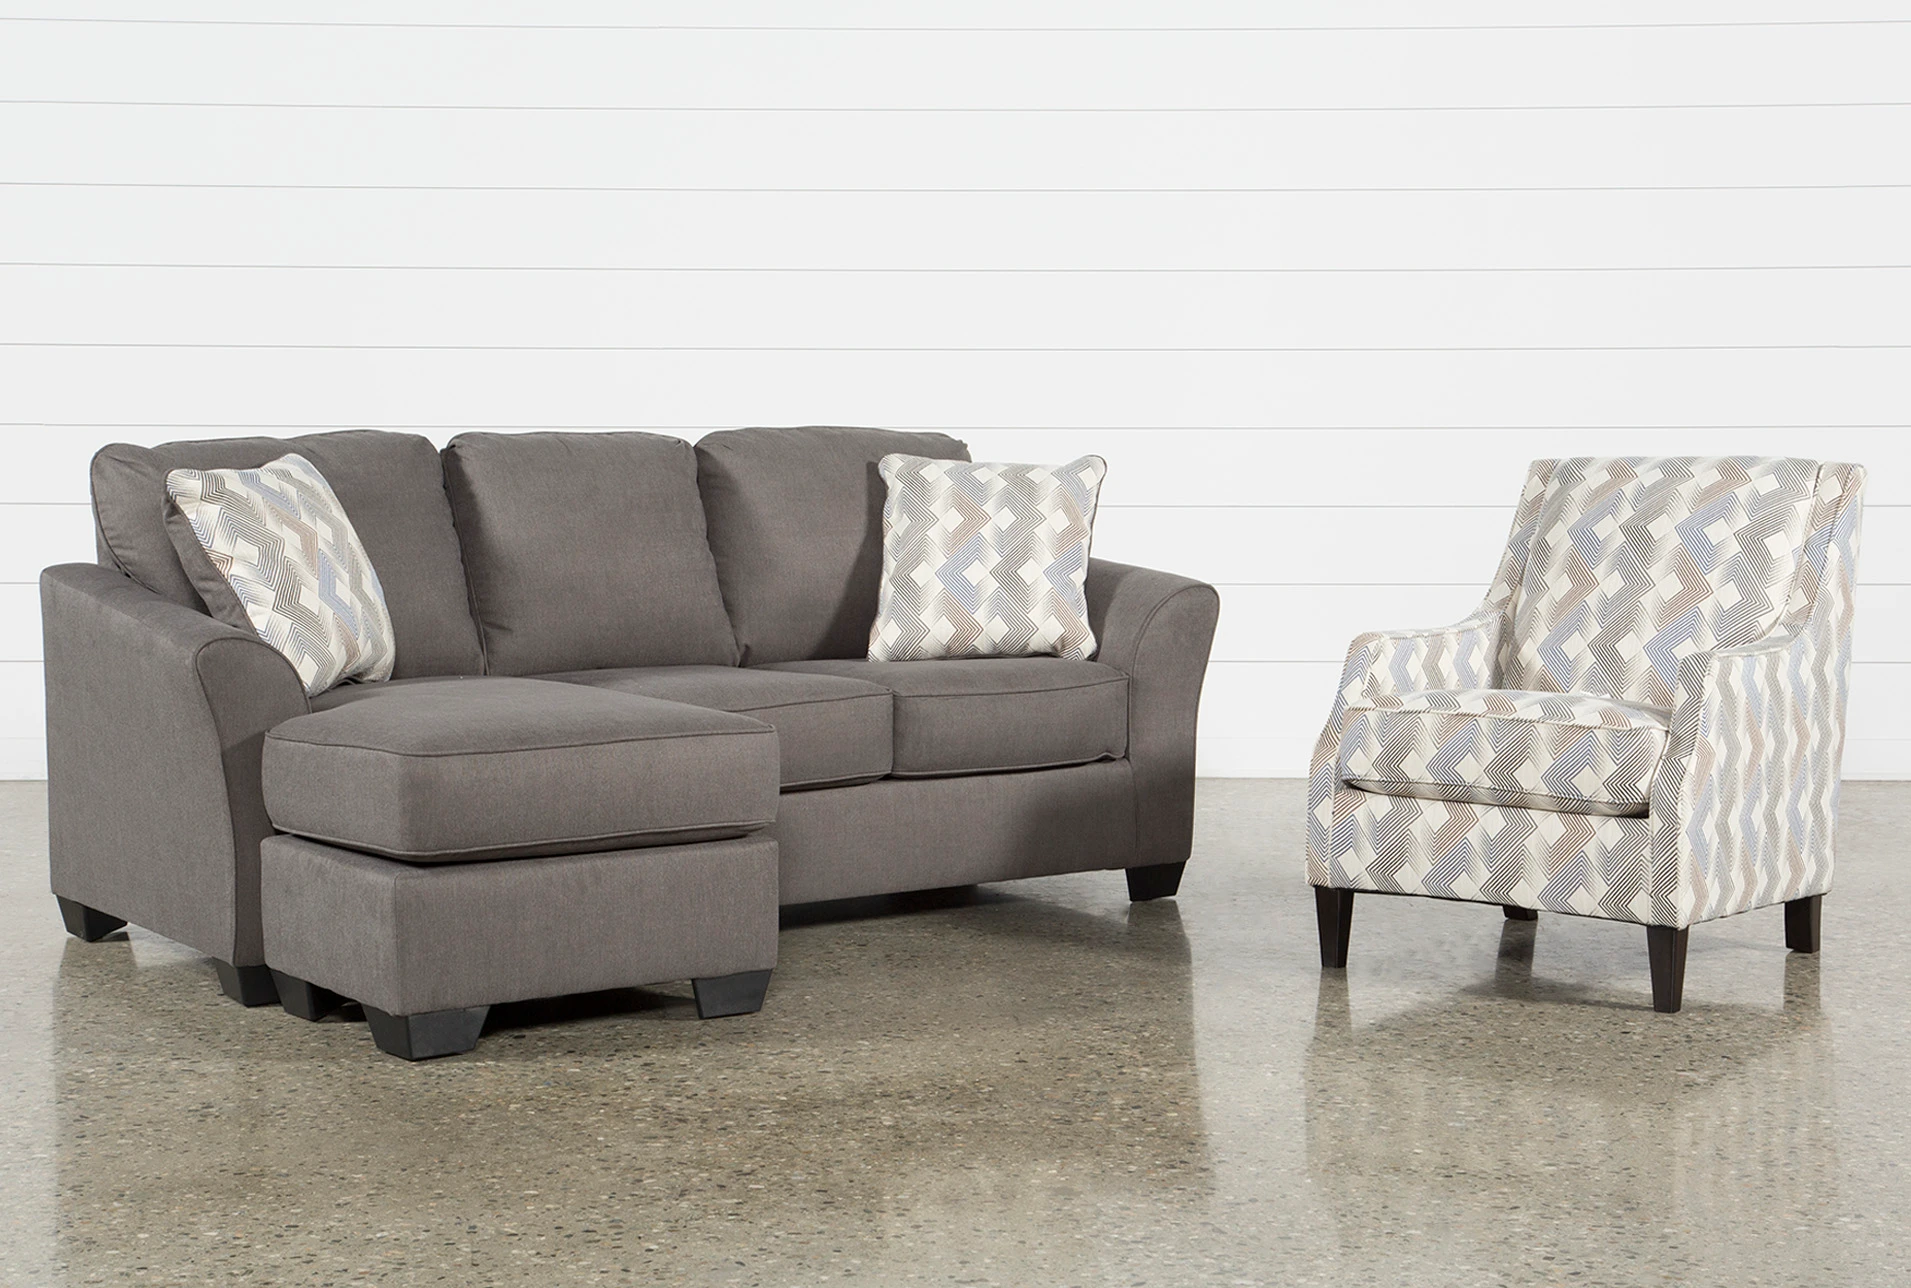 Tucker 2 Piece Living Room Set With Queen Sleeper And Accent Chair Living Spaces